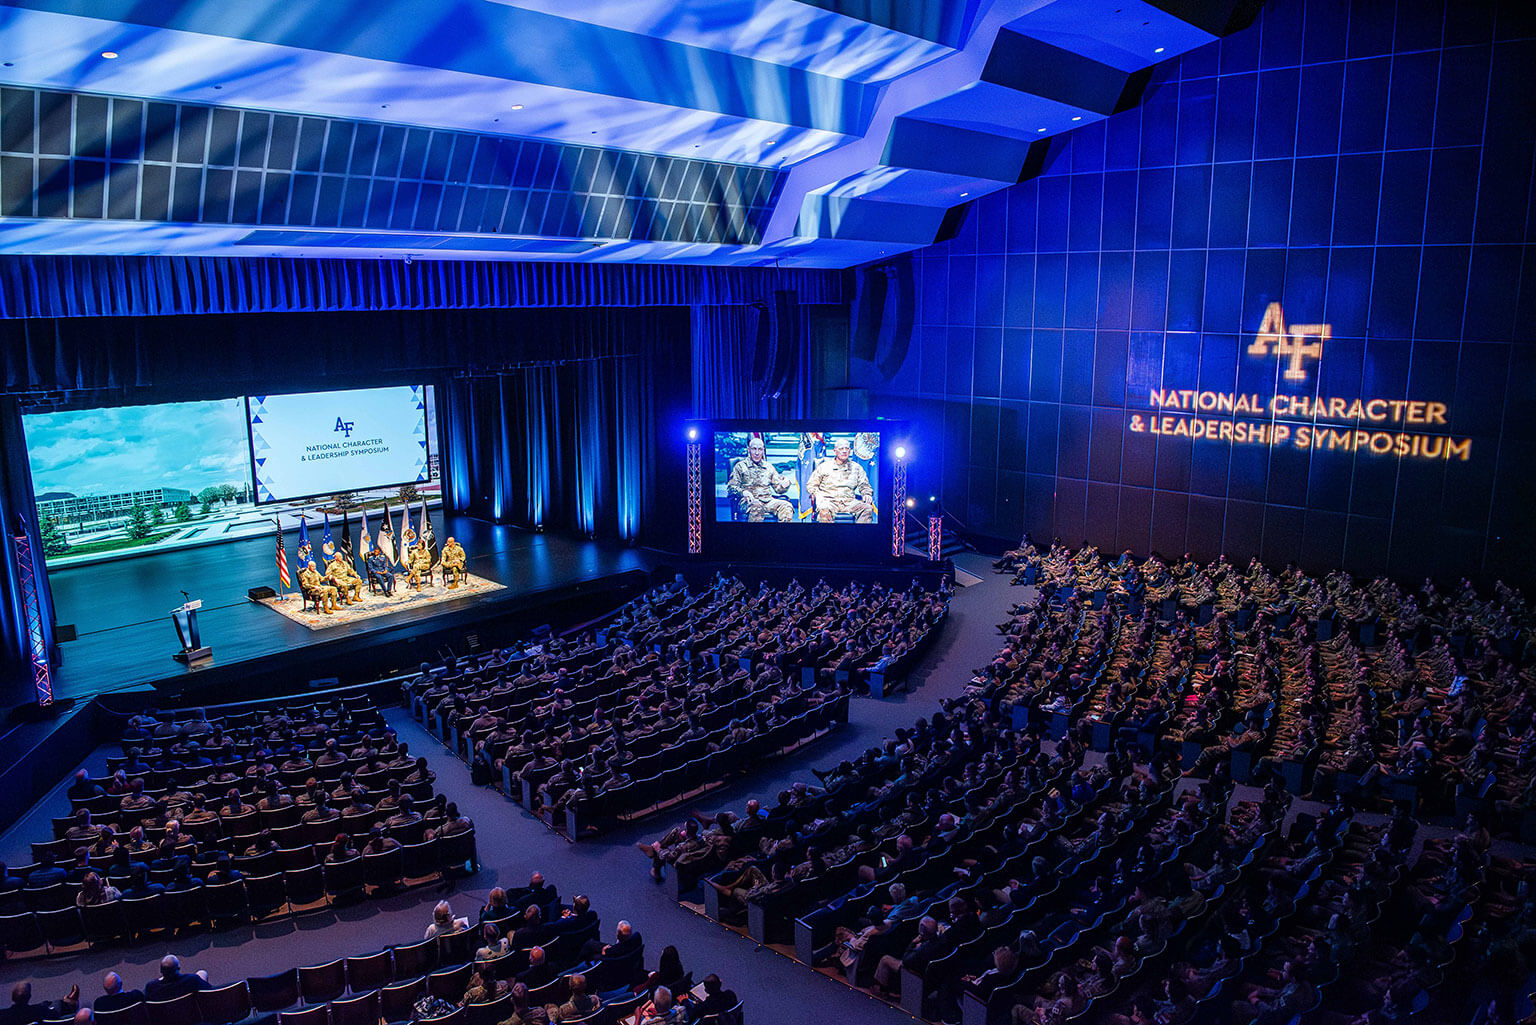 U.S. Air Force and Space Force senior leaders speak to a packed house at the U.S. Air Force Academy’s 31st National Character and Leadership Symposium.